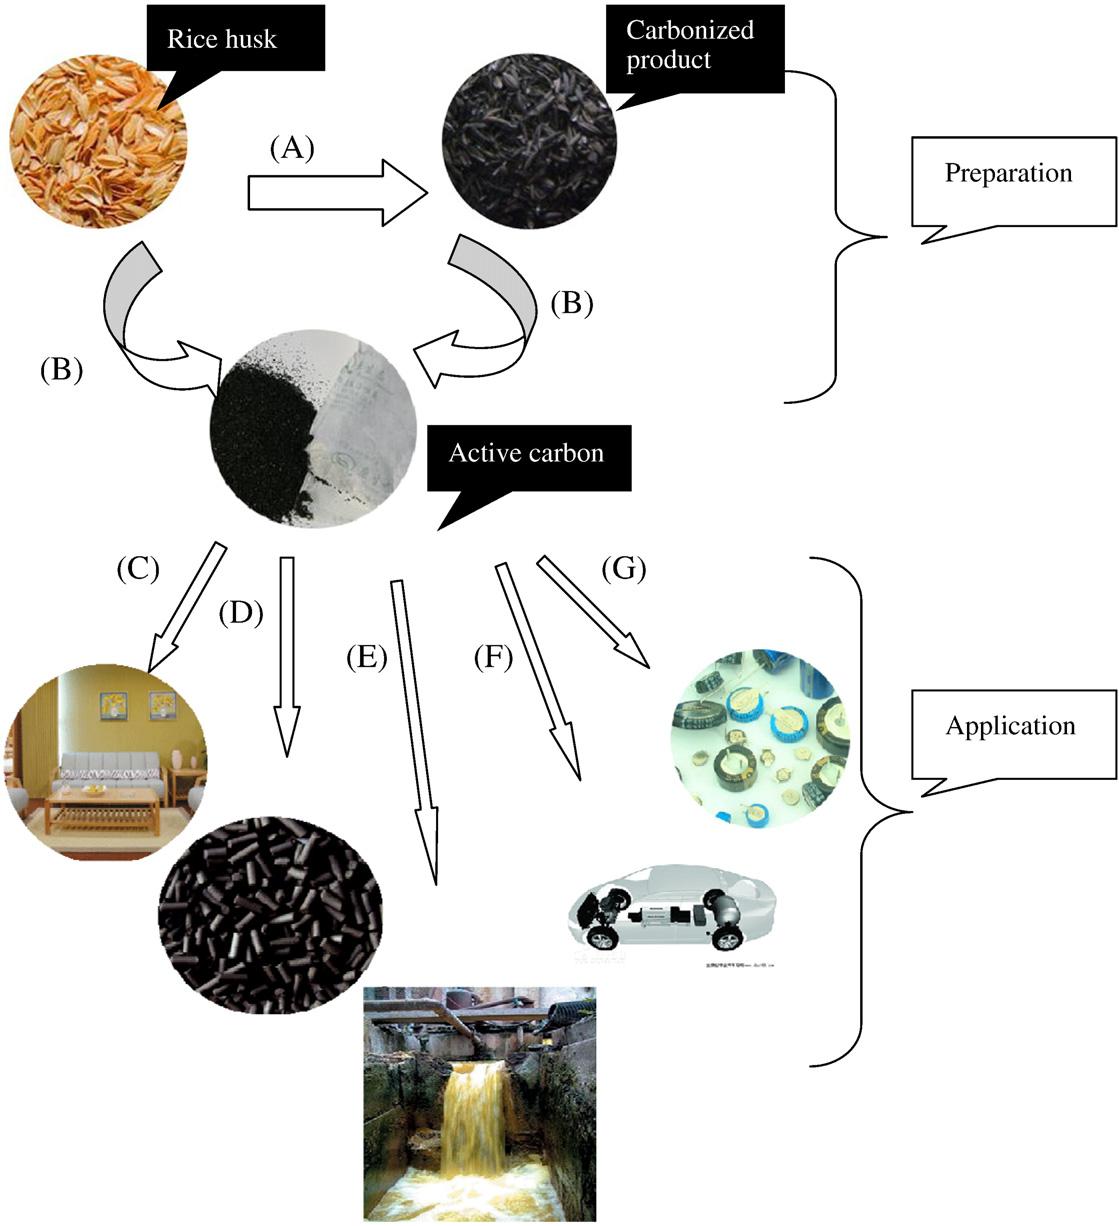 Schematic illustration of the preparation and application that activated carbon derived from ricehusk.